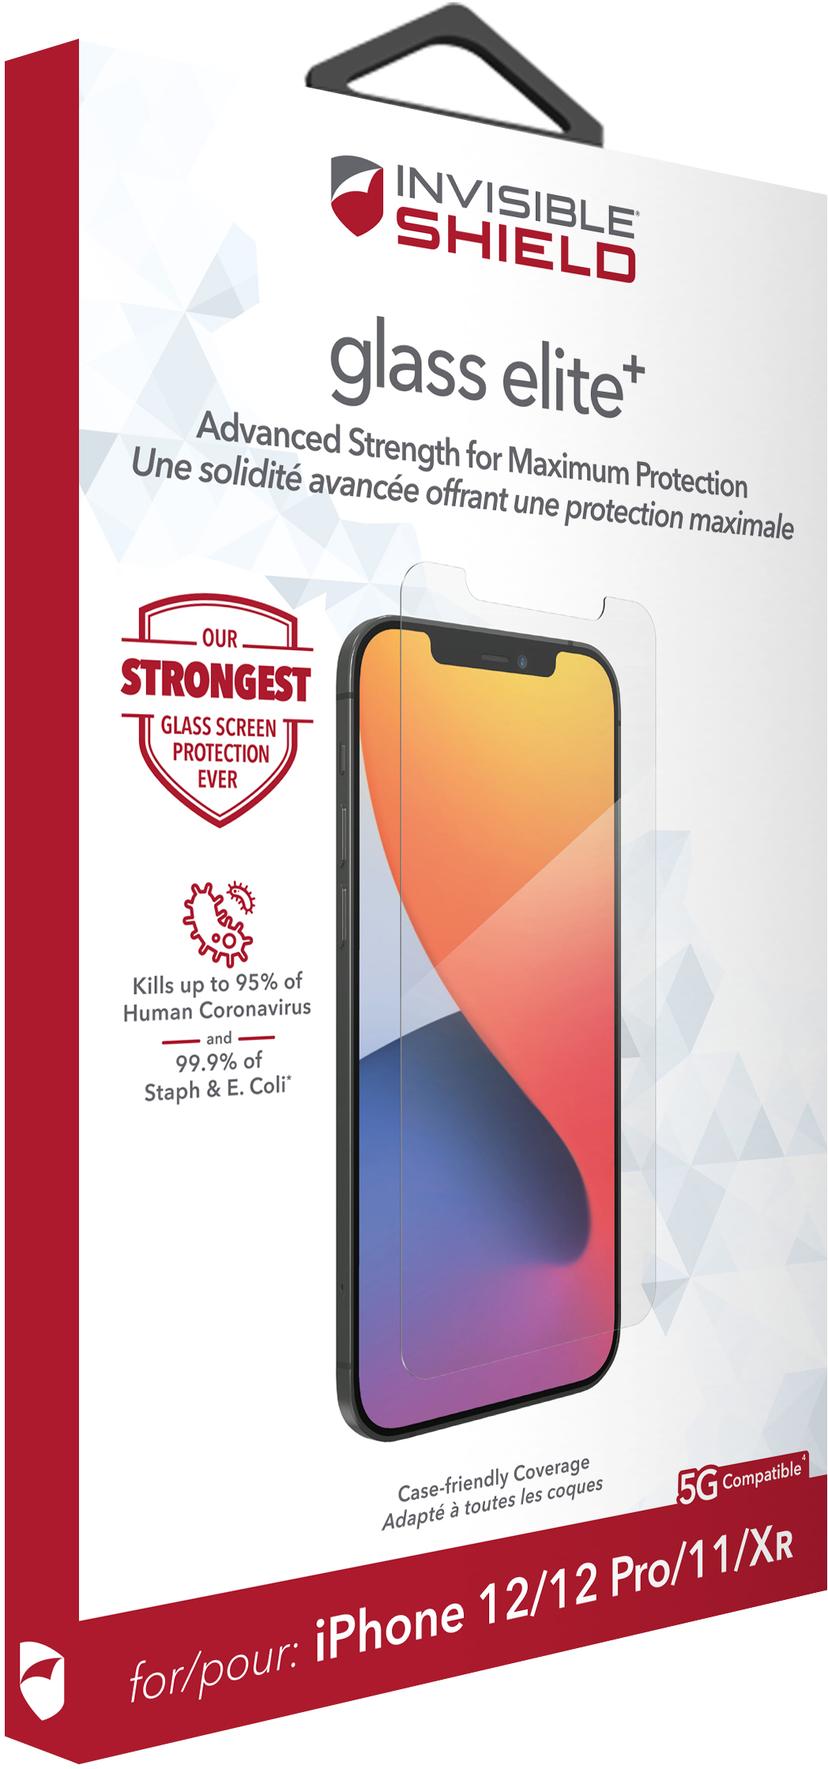 Zagg InvisibleShield Glass Elite+ iPhone 11, iPhone 12, iPhone 12 Pro, iPhone Xr